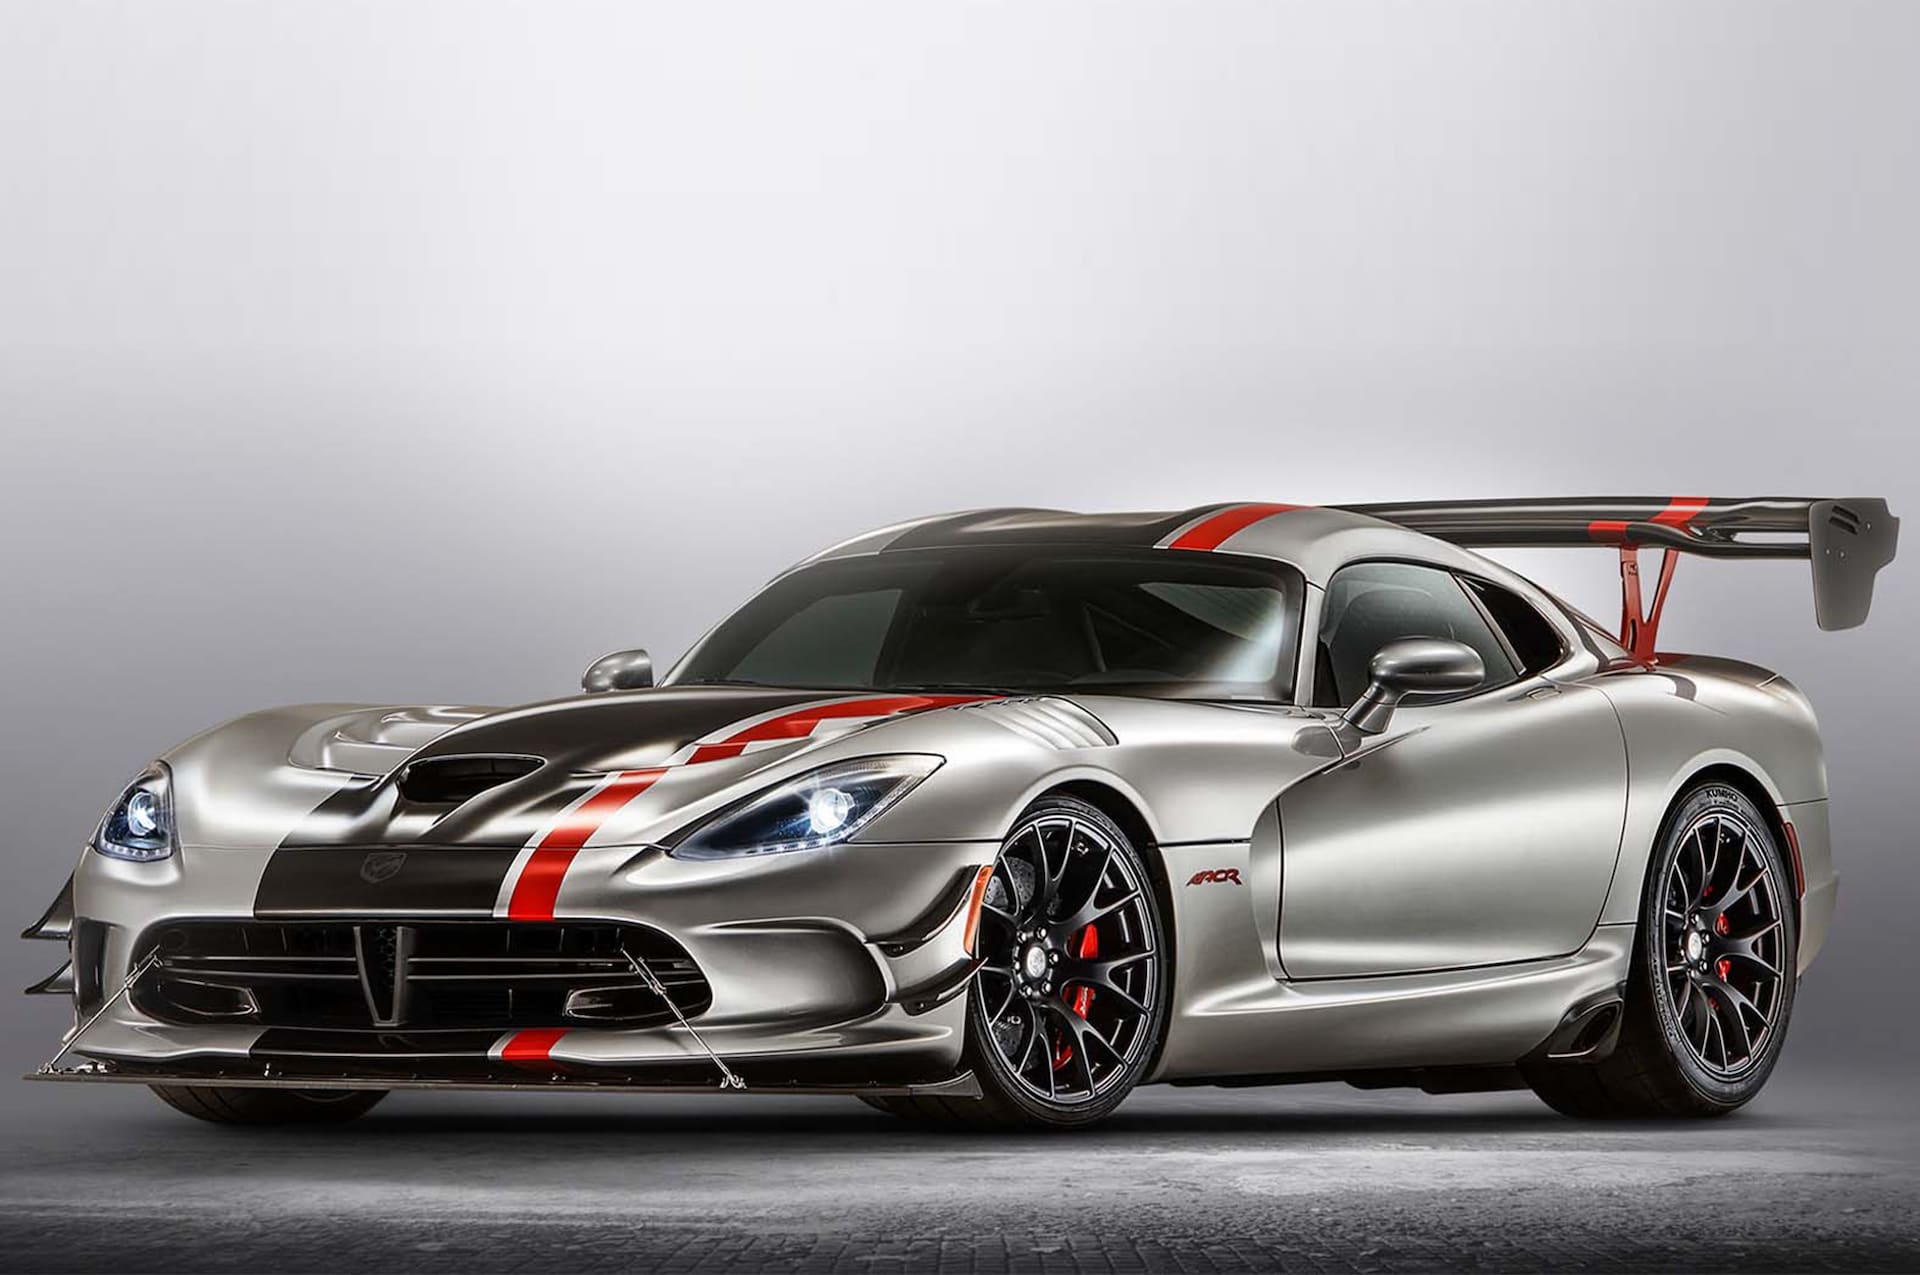 We Drive the Fully Adjustable, Customizable 2016 Dodge Viper ACR